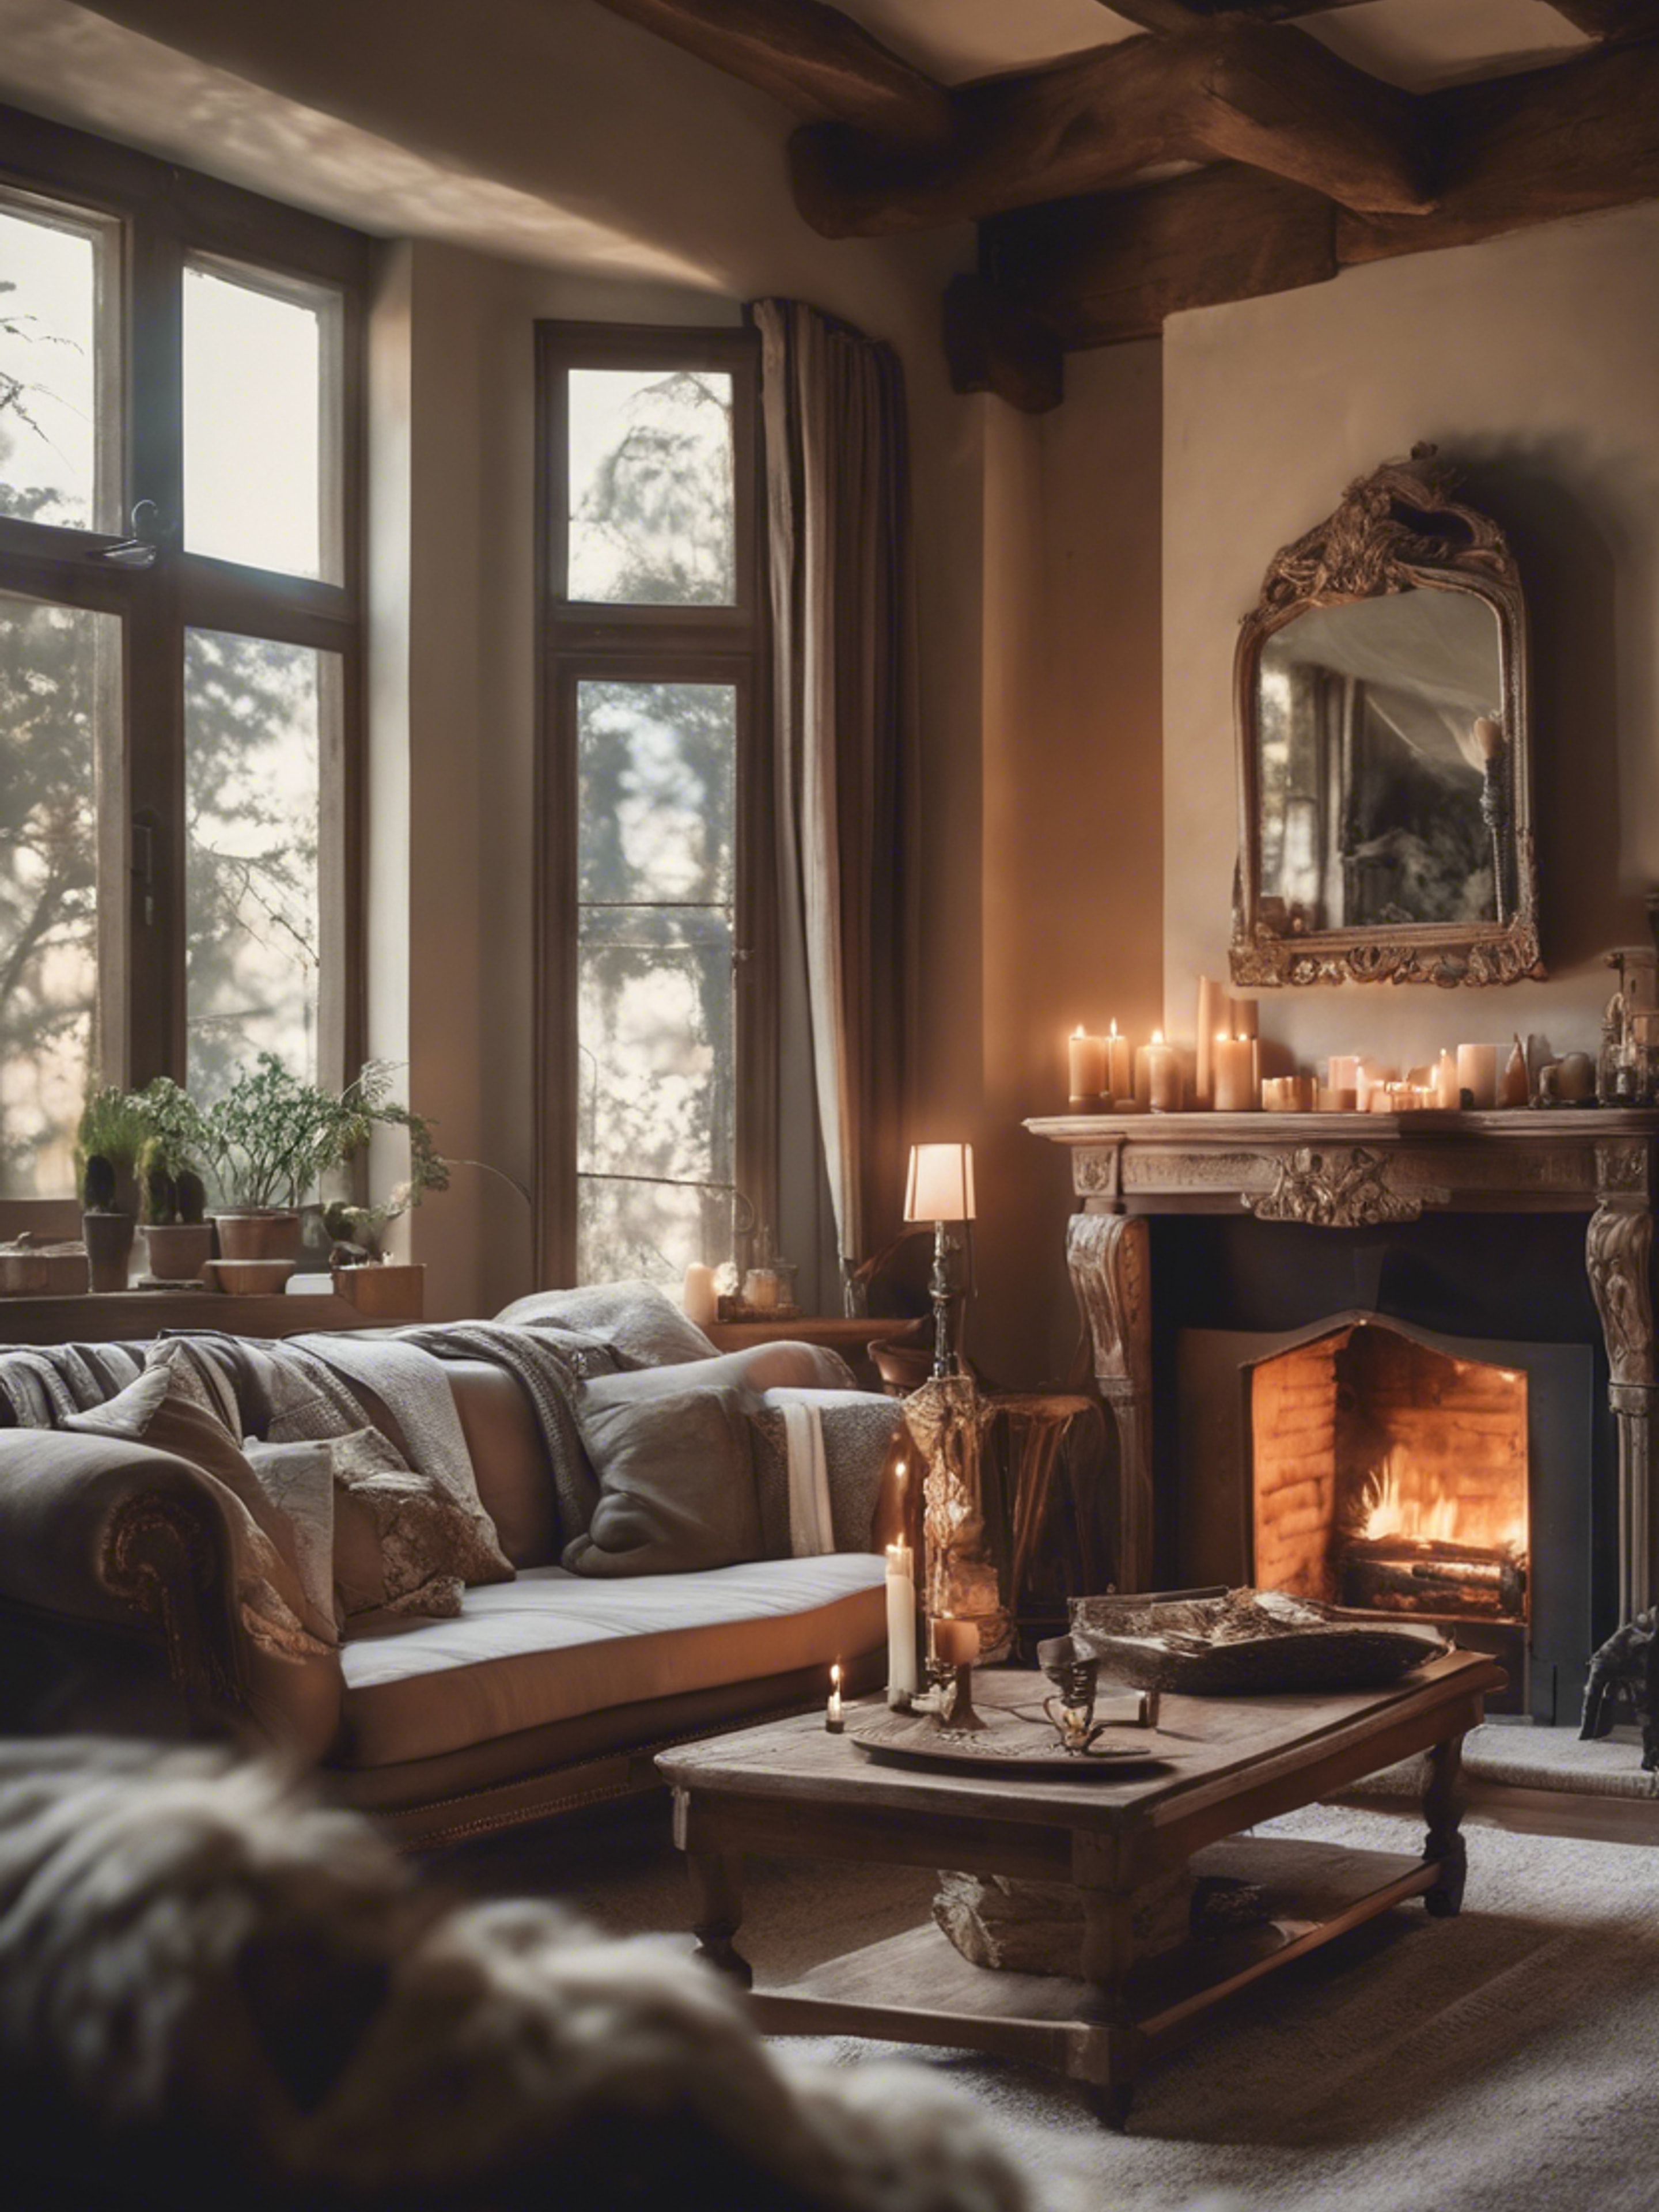 A French country style living room, cozy and comfortable with a roaring fireplace, antique furniture, and soft candlelight. Tapet[b1f658778f85425ba676]